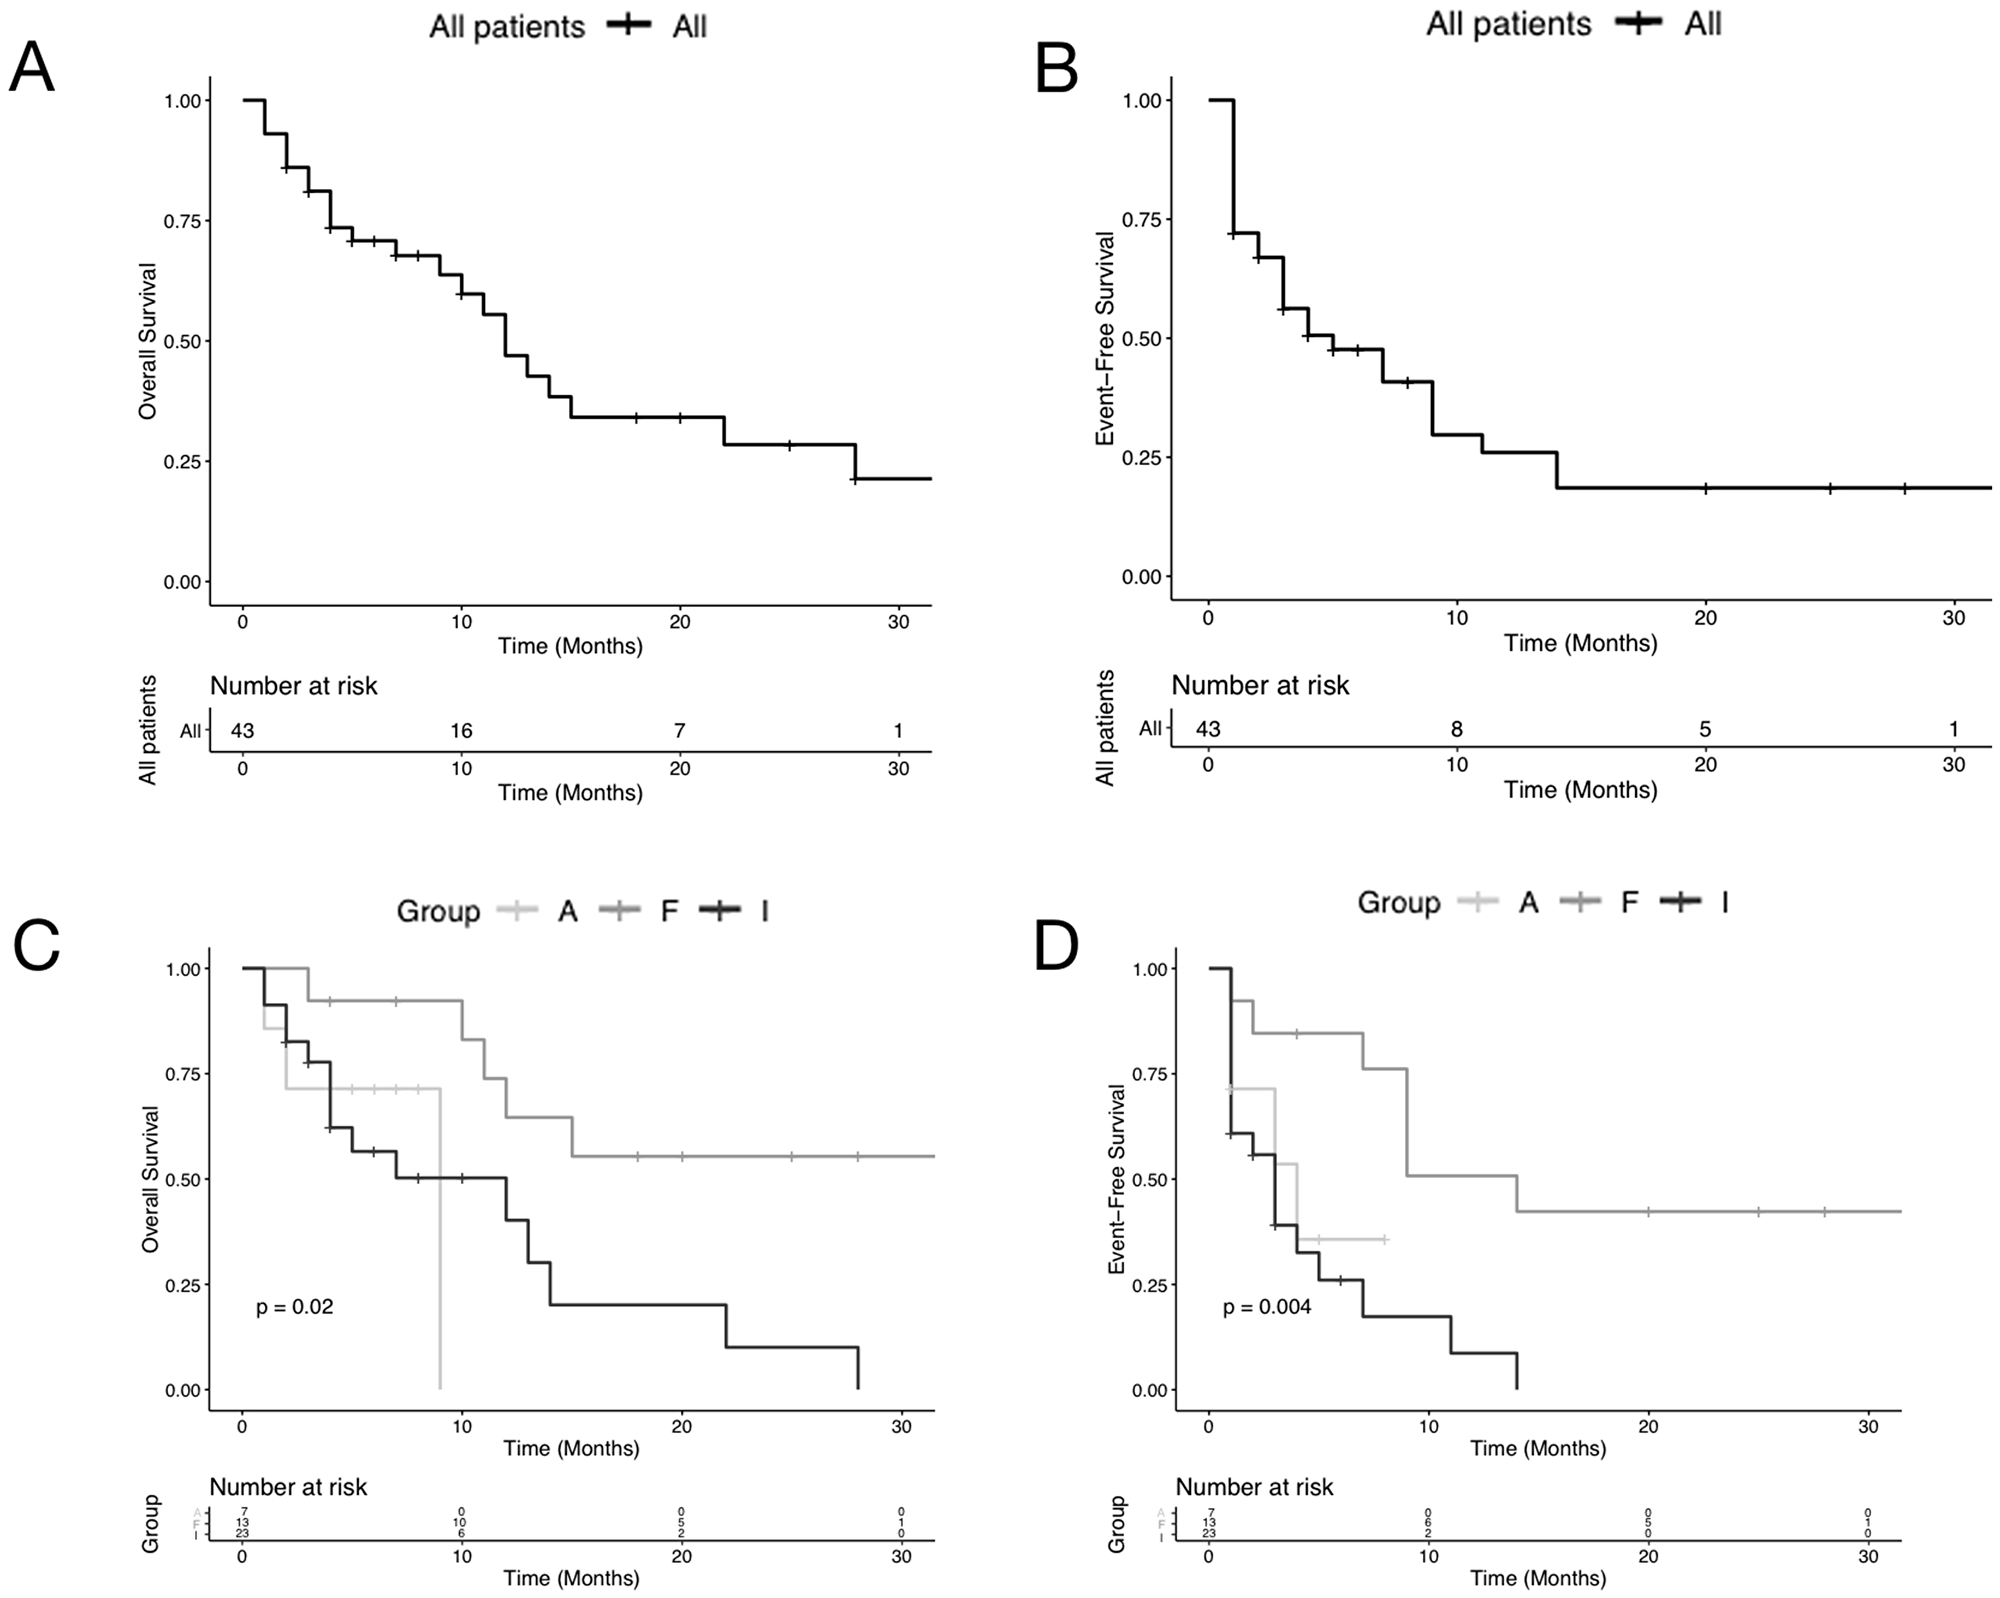 Plots of Kaplan-Meier limit estimates of overall survival and event-free survival curve analysis of acute myeloid leukemia patients at diagnosis.